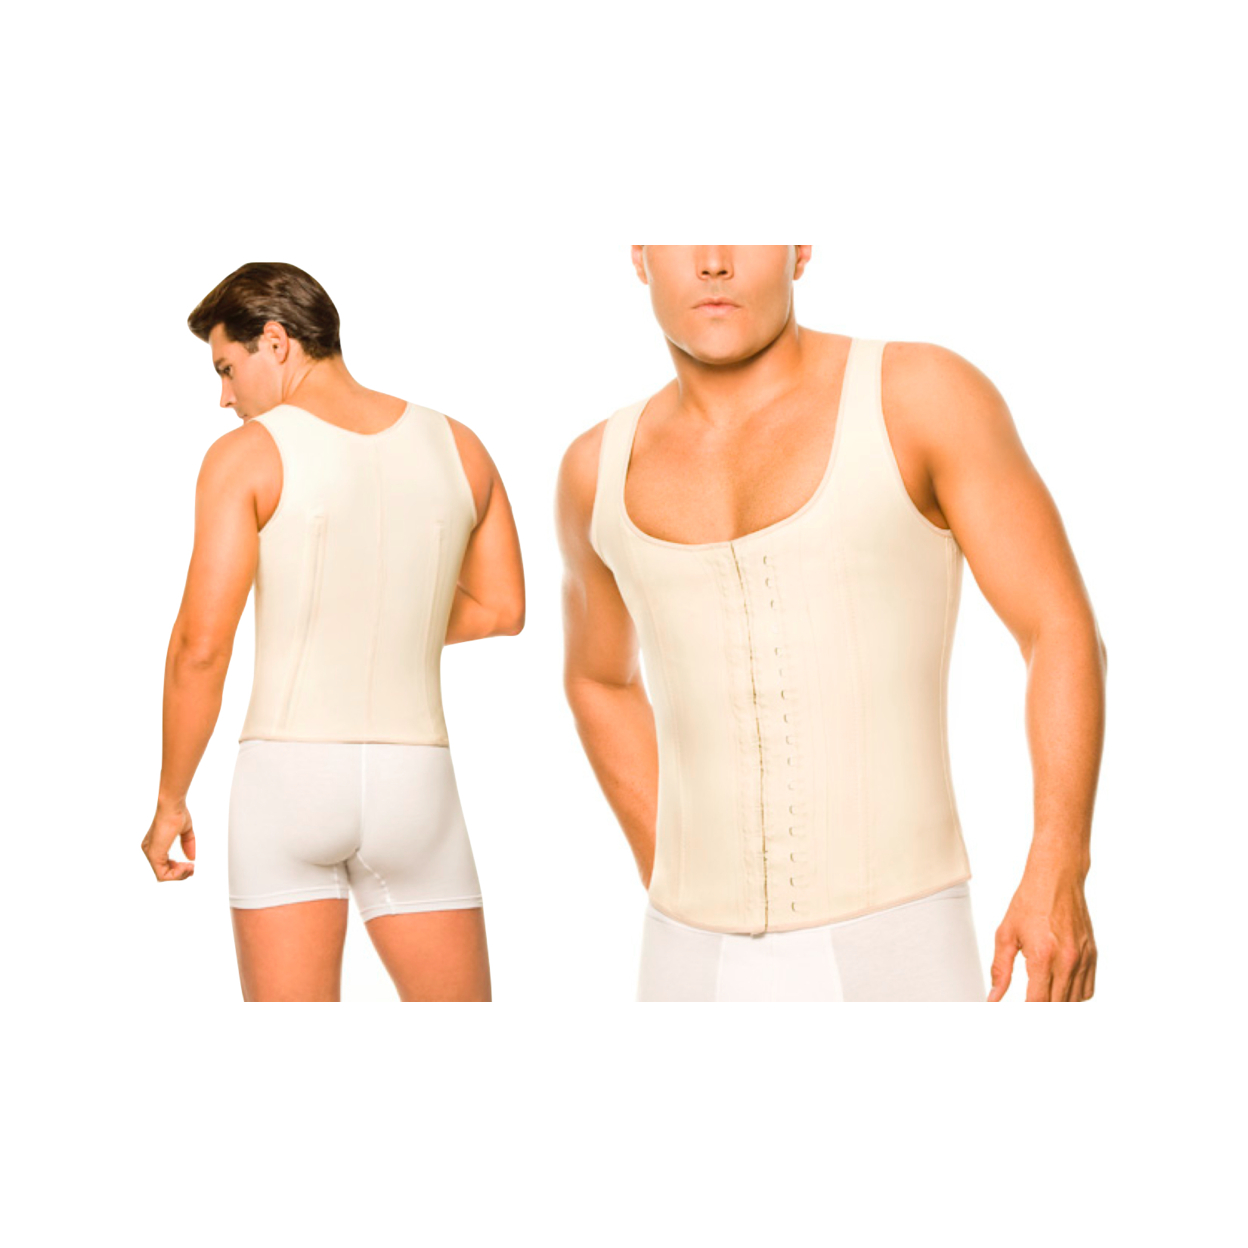 Men Waistcoat High-Compression Body Shaper In Regular And Plus Sizes - Nude, Small